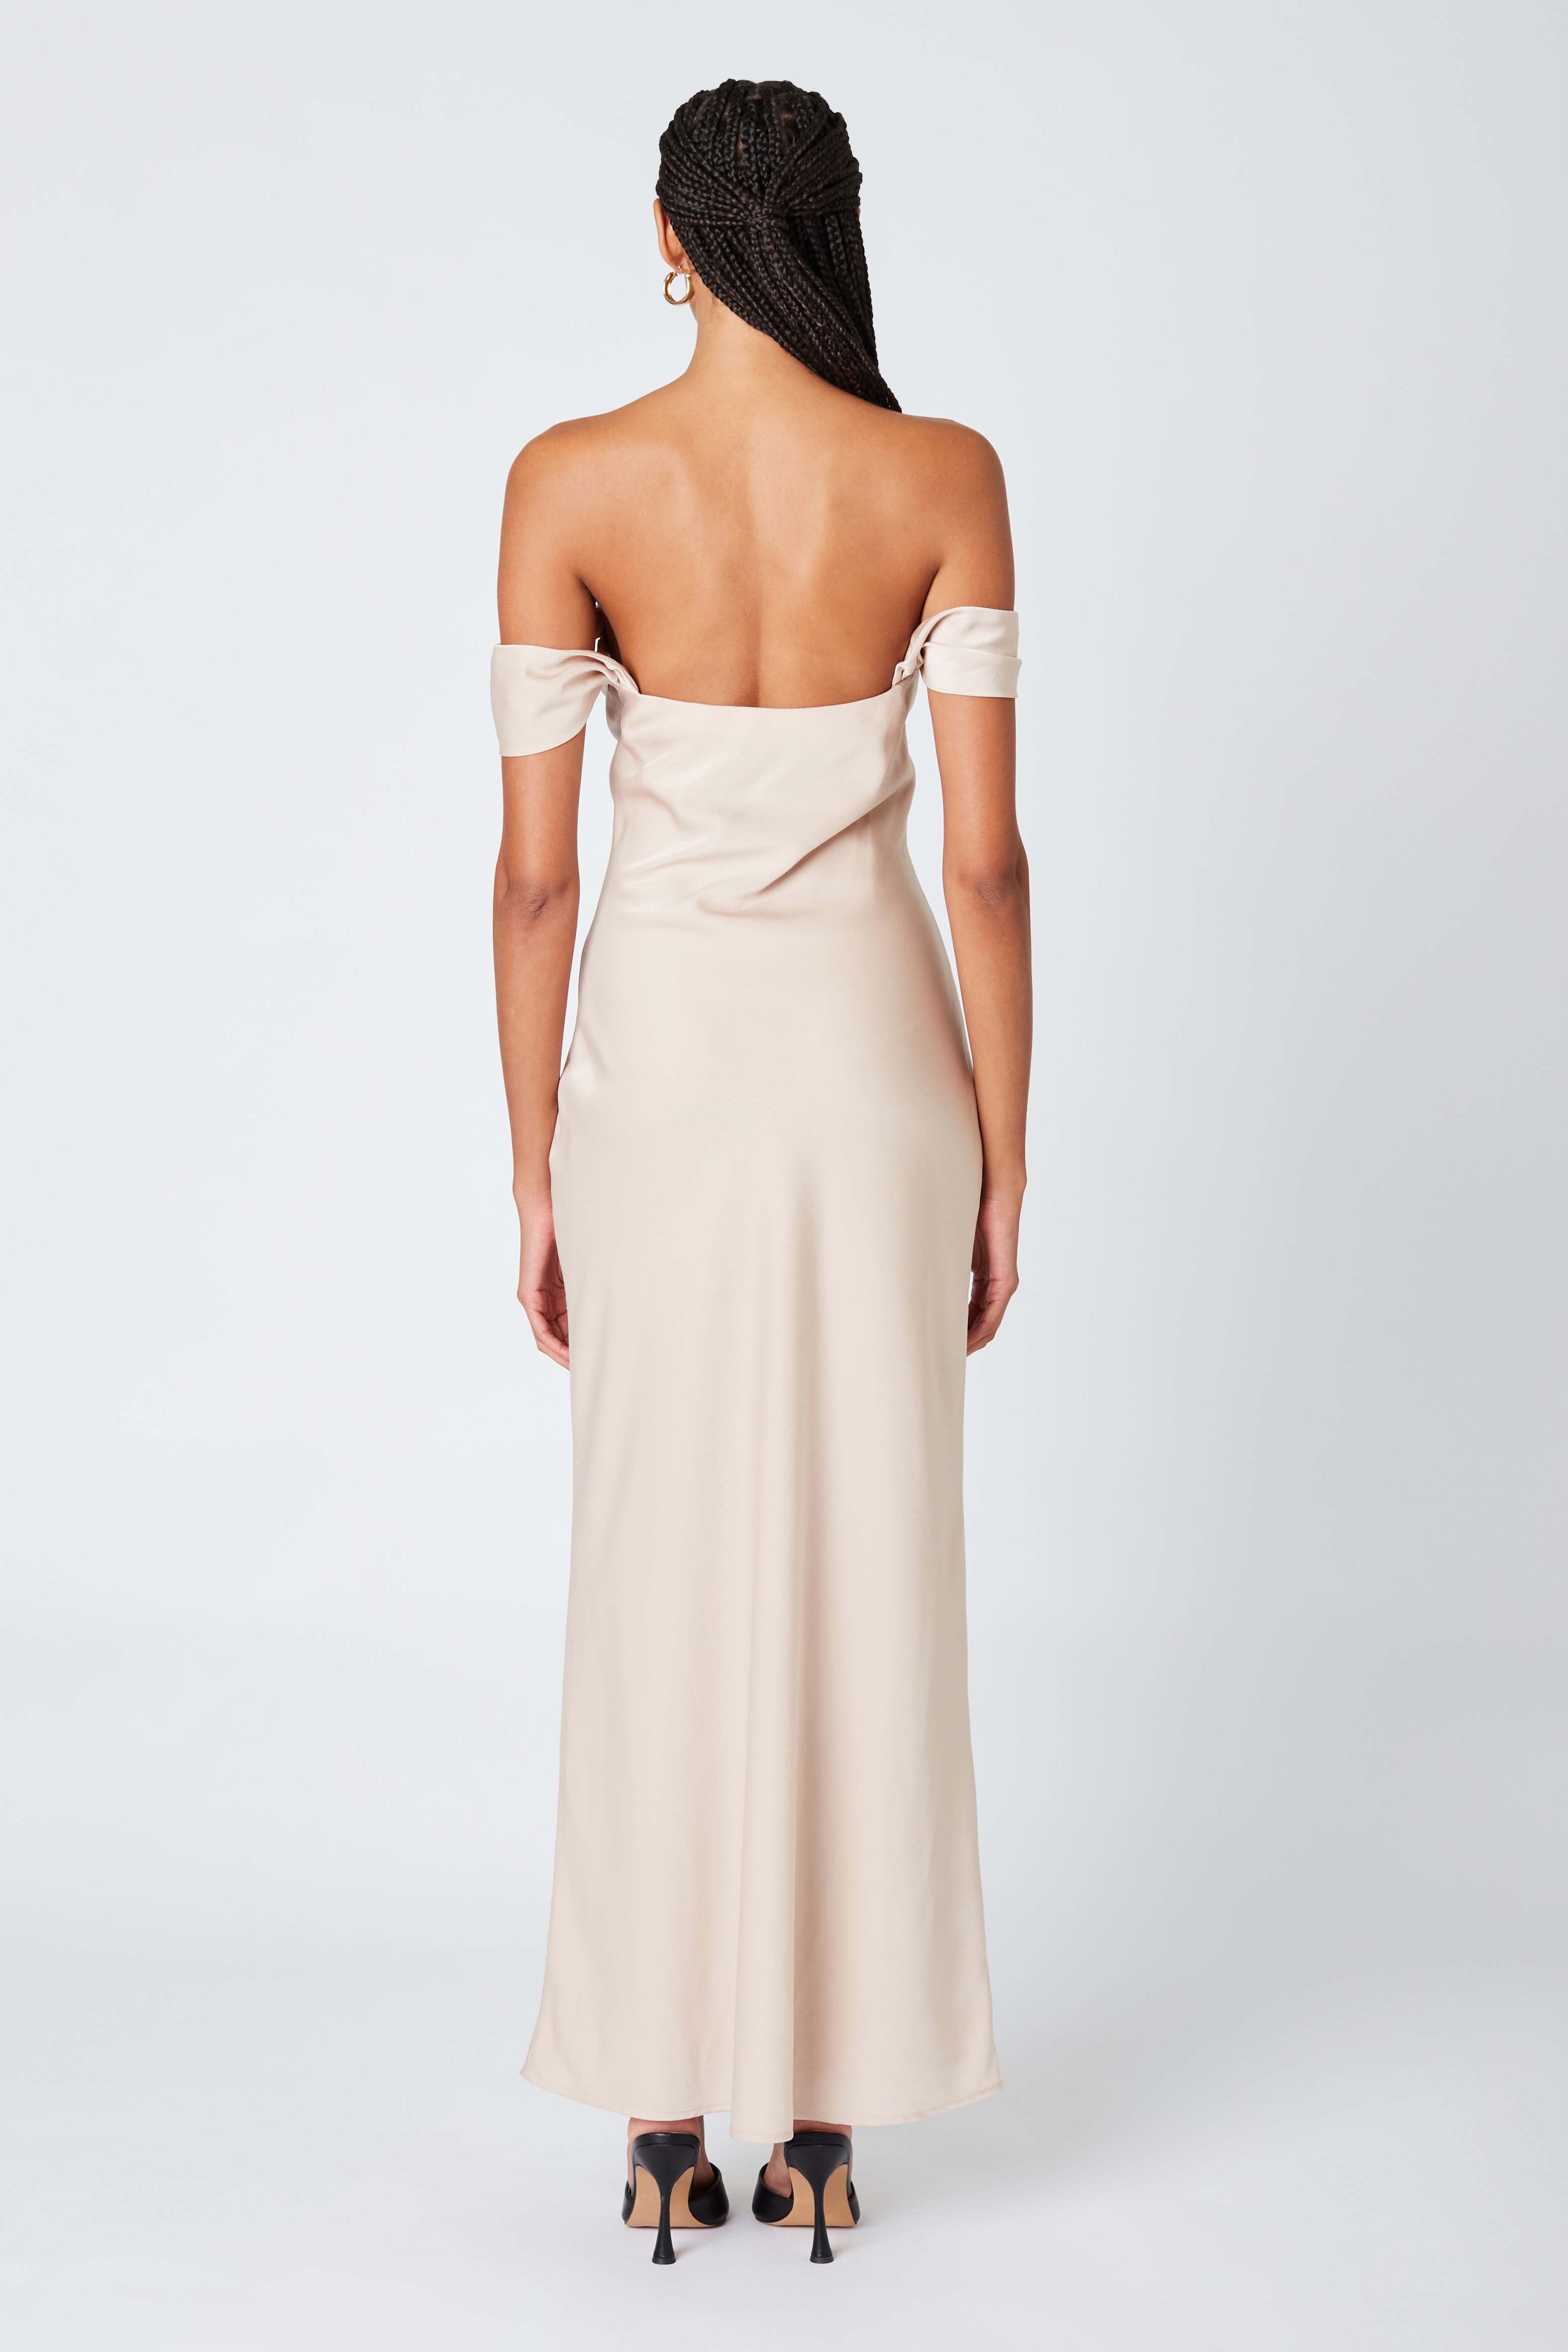 Satin Off the Shoulder Maxi Dress in Buff Back View